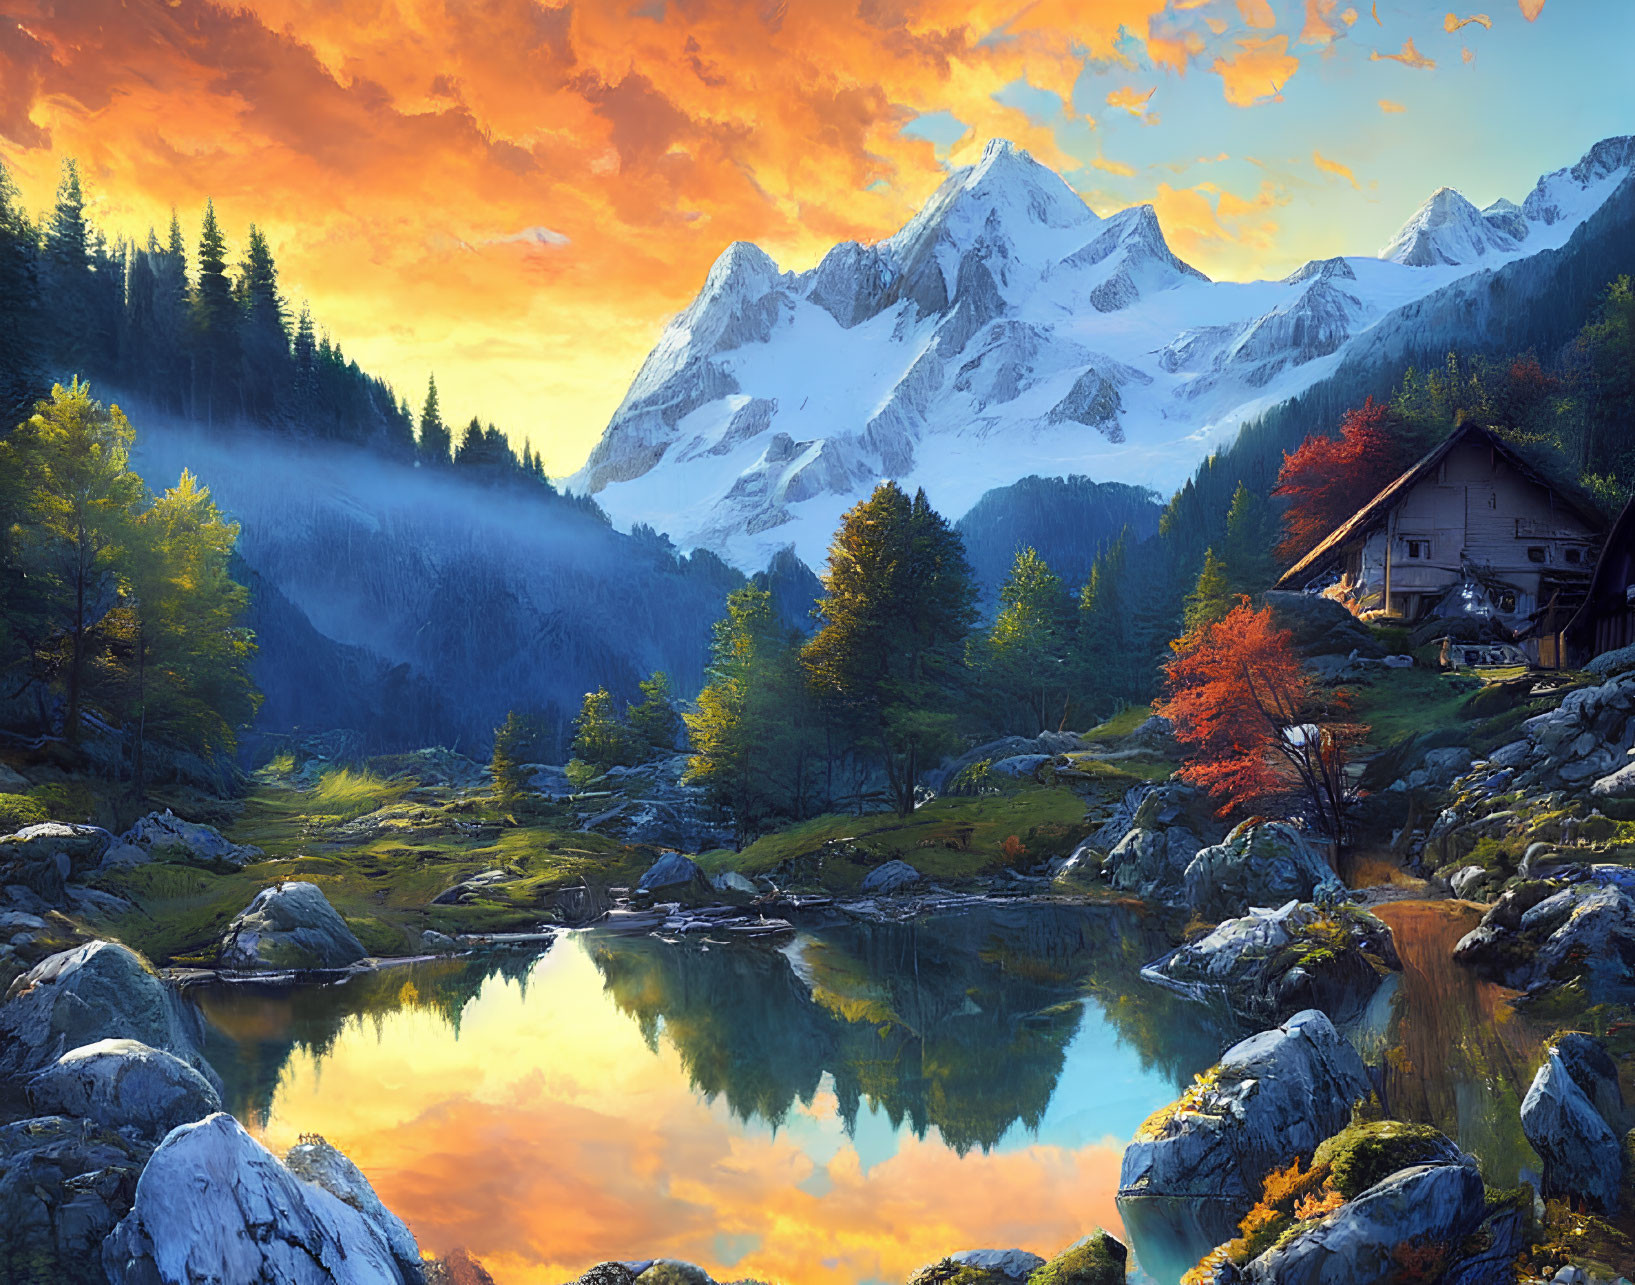 Tranquil mountain landscape with cabin, autumn trees, lake, and sunset